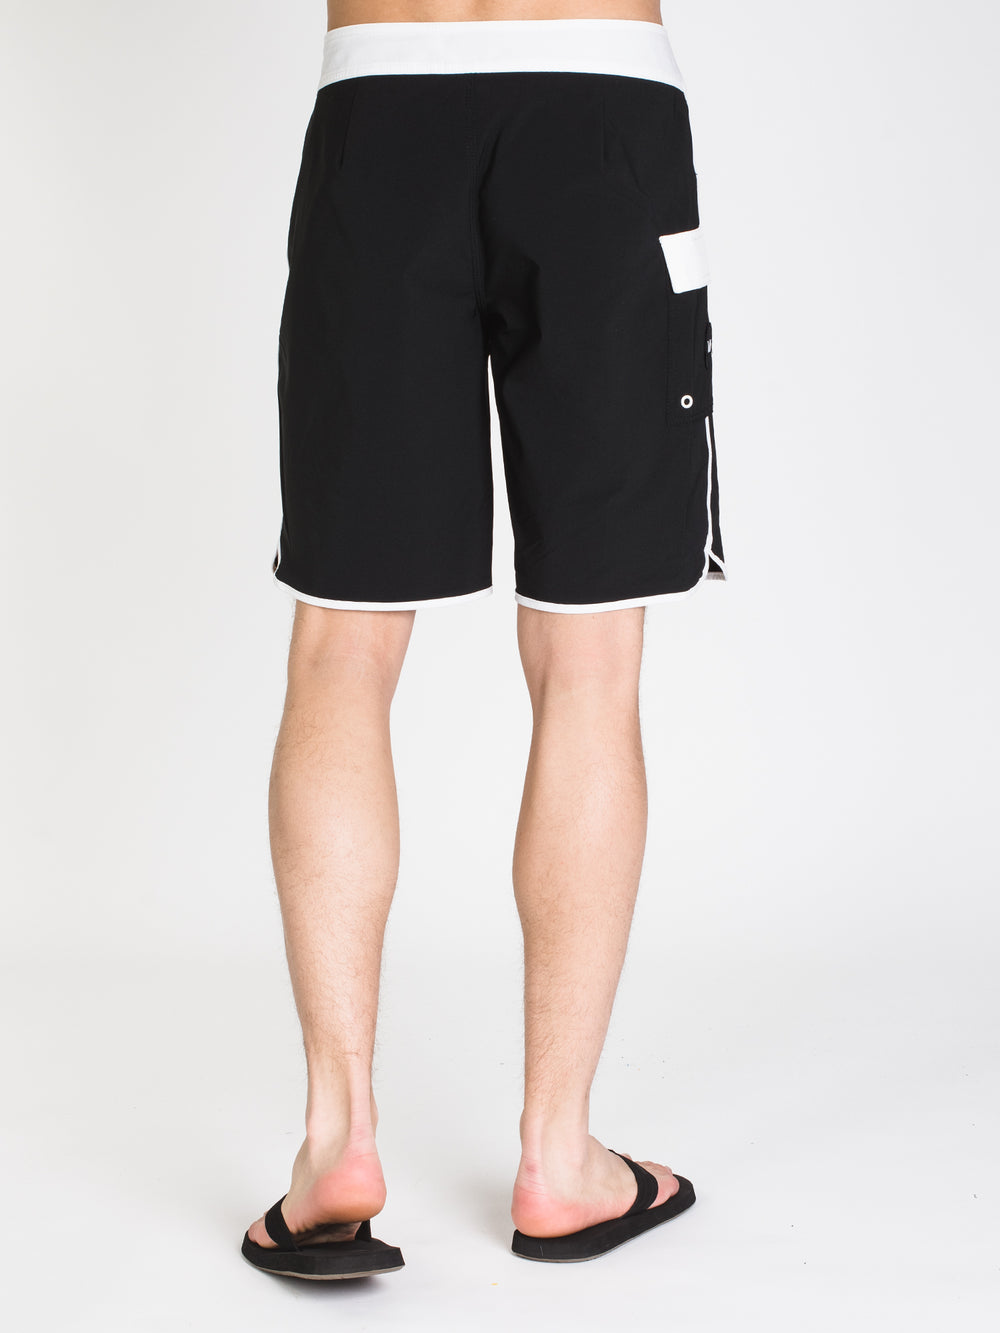 MENS EASTERN 20' TRUNK - BLK/WHT - CLEARANCE